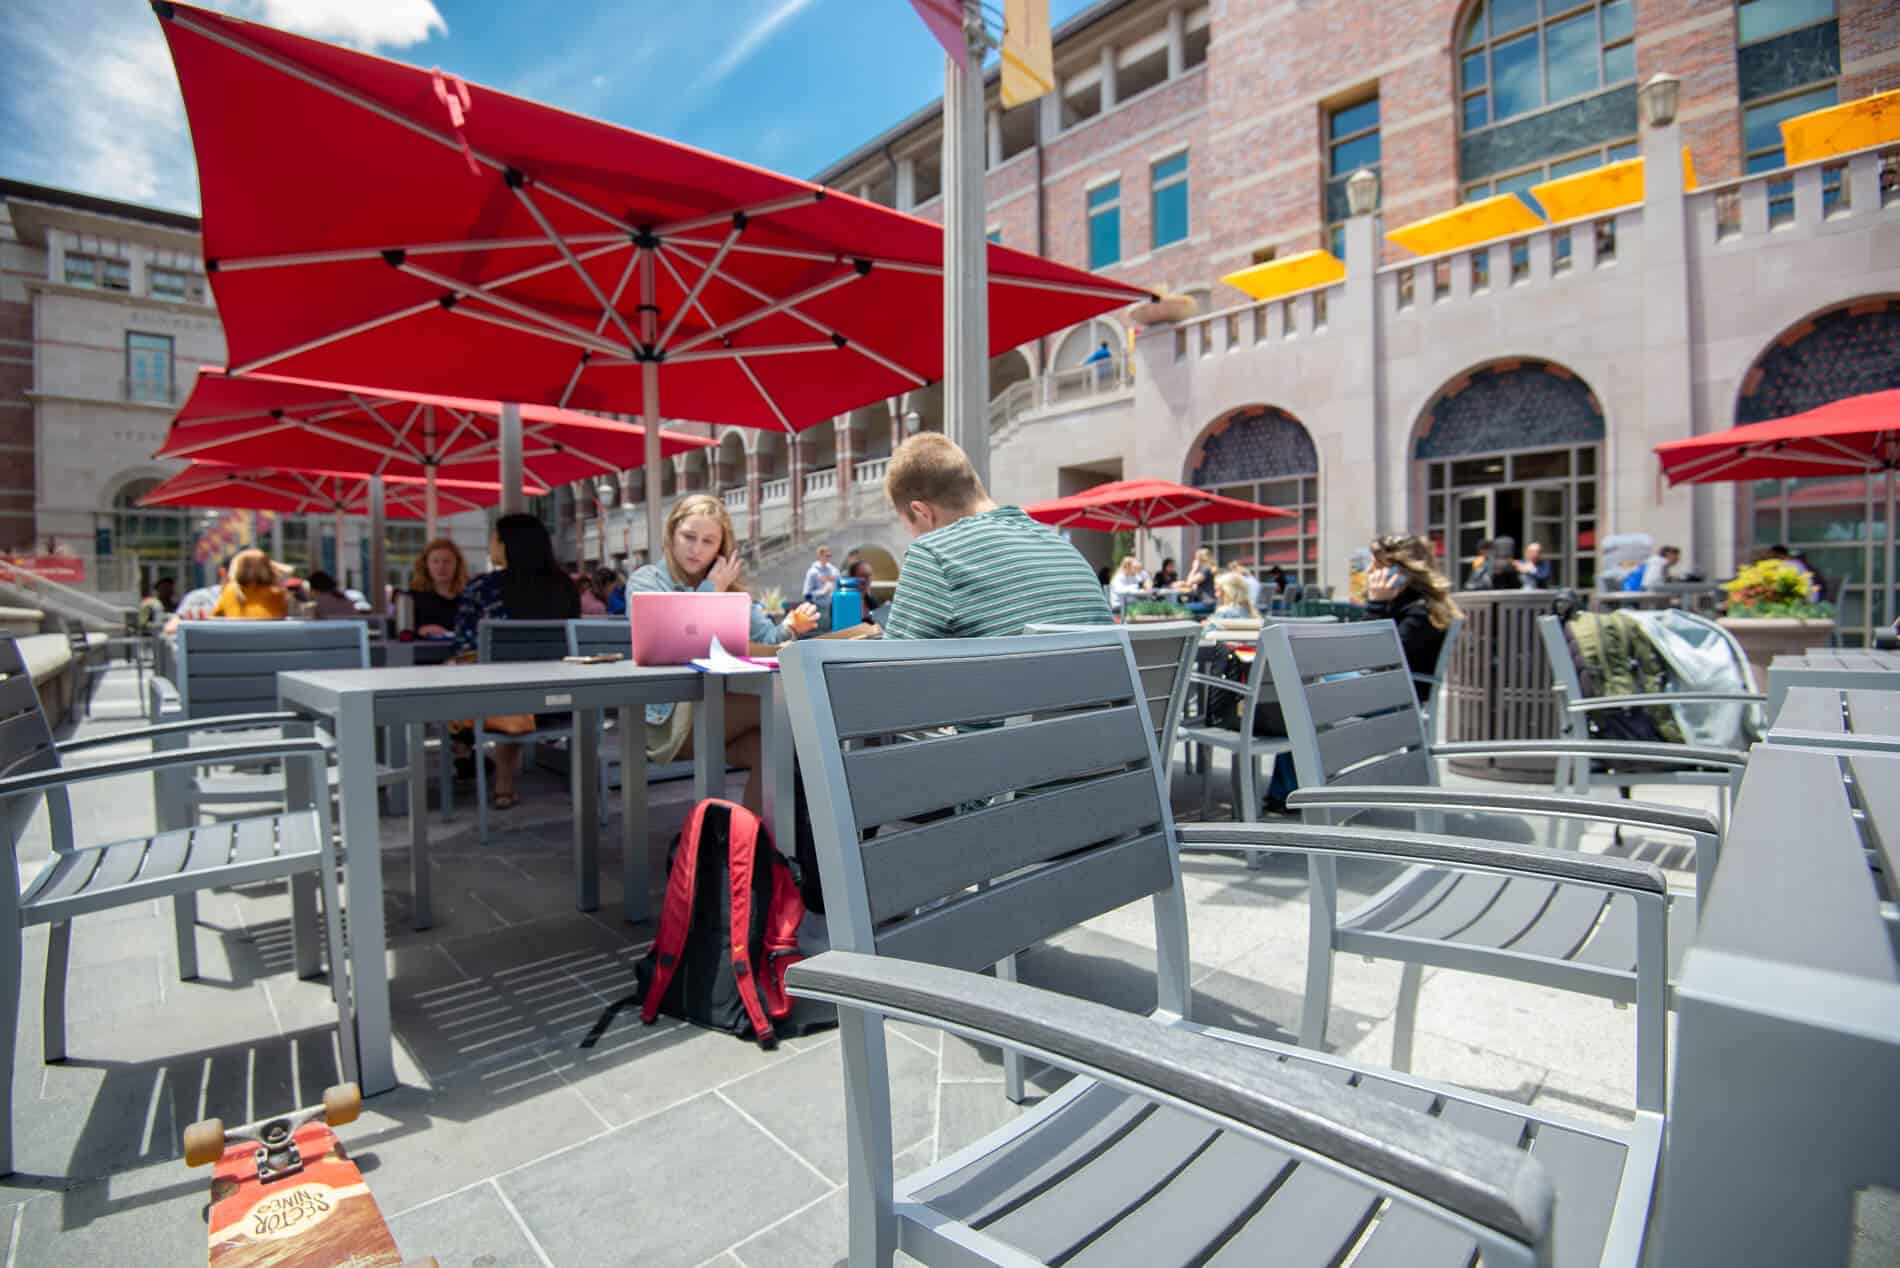 Outdoor plaza with weather-resistant chairs, tables and umbrellas